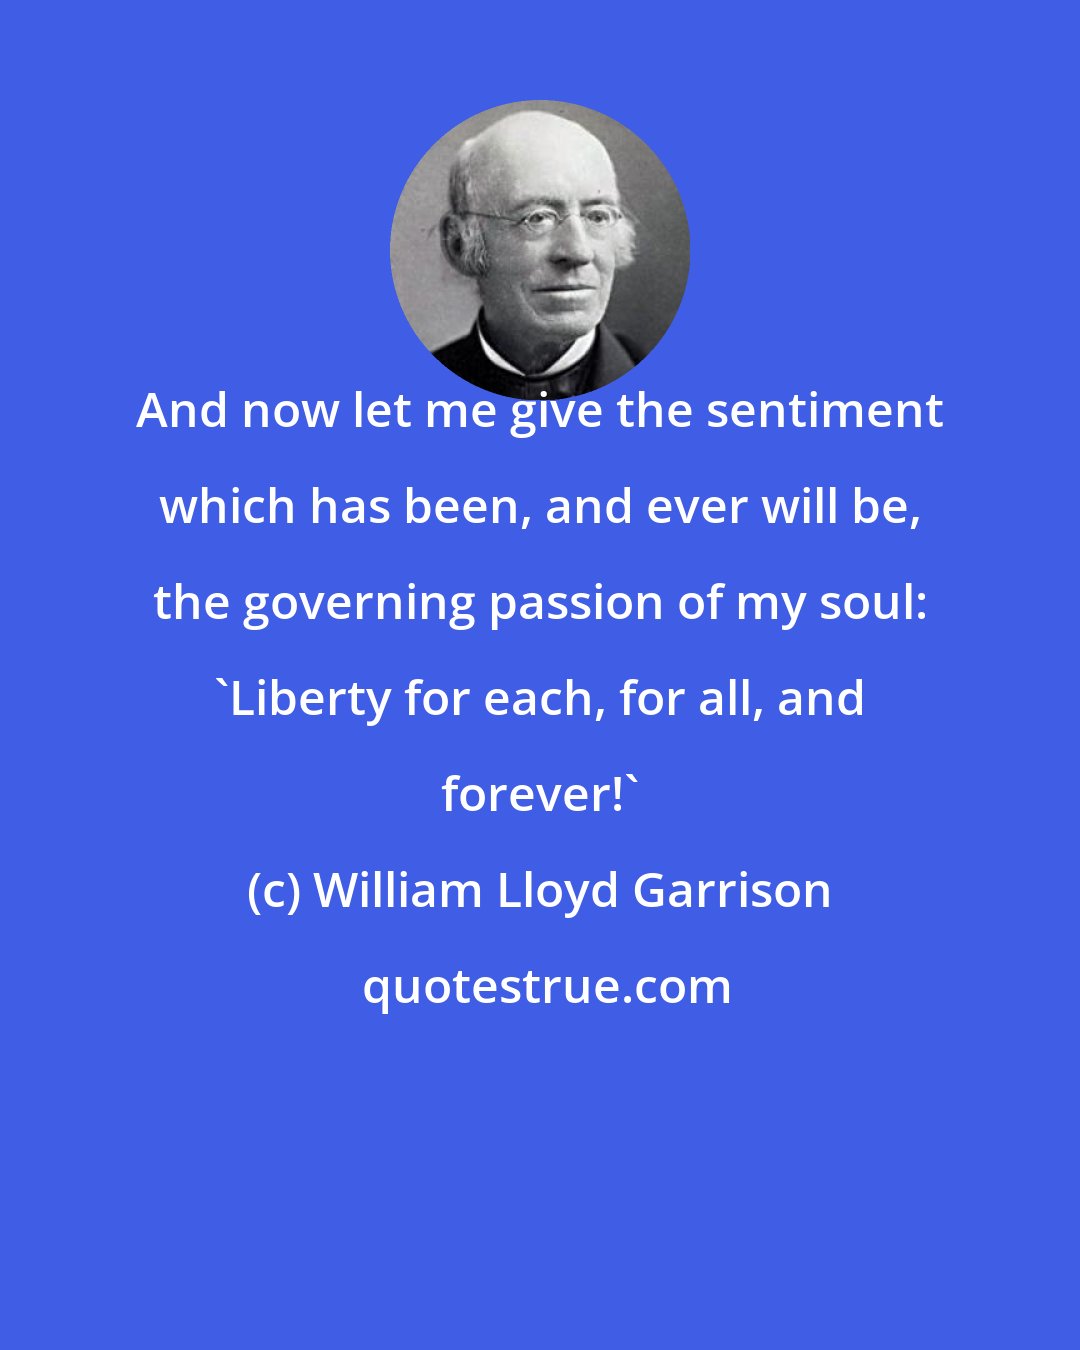 William Lloyd Garrison: And now let me give the sentiment which has been, and ever will be, the governing passion of my soul: 'Liberty for each, for all, and forever!'